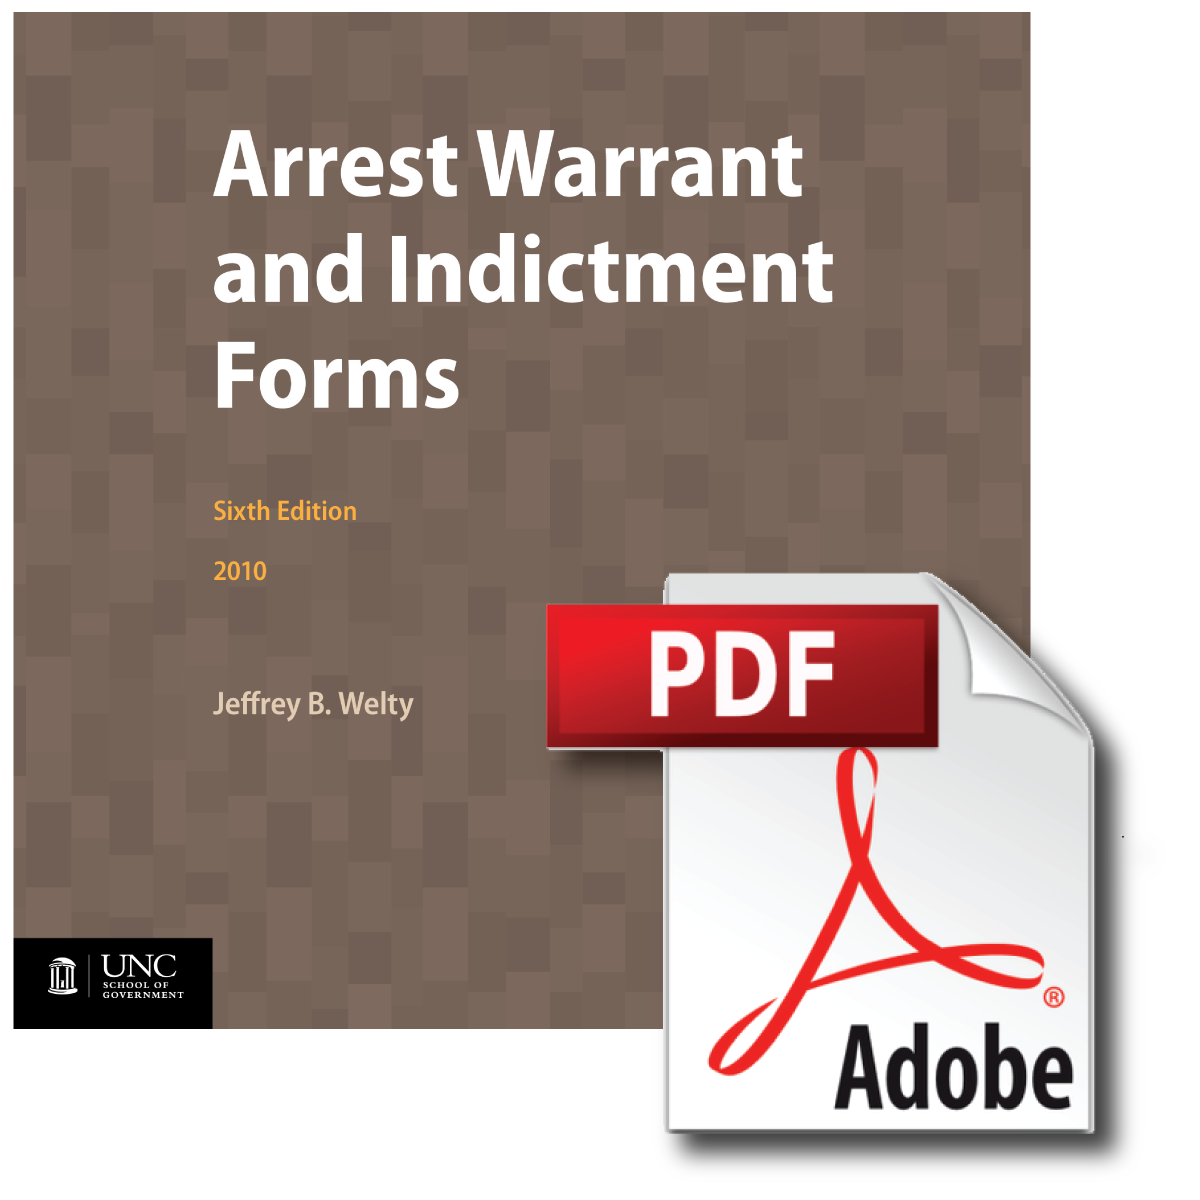 Cover image for 2013 Update to Arrest Warrant and Indictment Forms, Sixth Edition, 2010 (Free PDF)